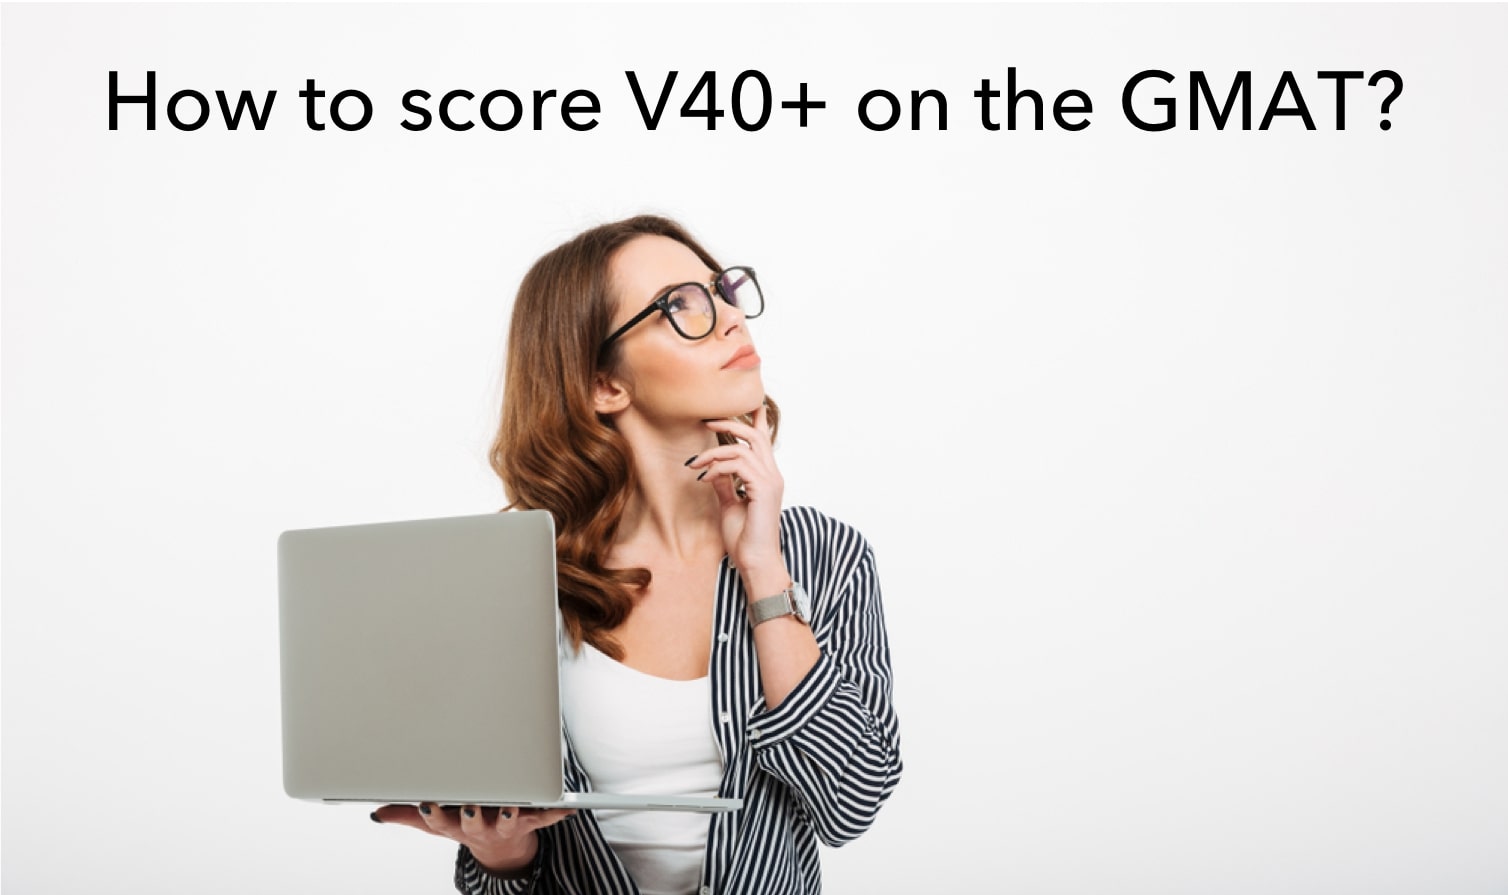 How to improve Verbal in GMAT – Tips from V40+ scorers to improve GMAT Verbal Score